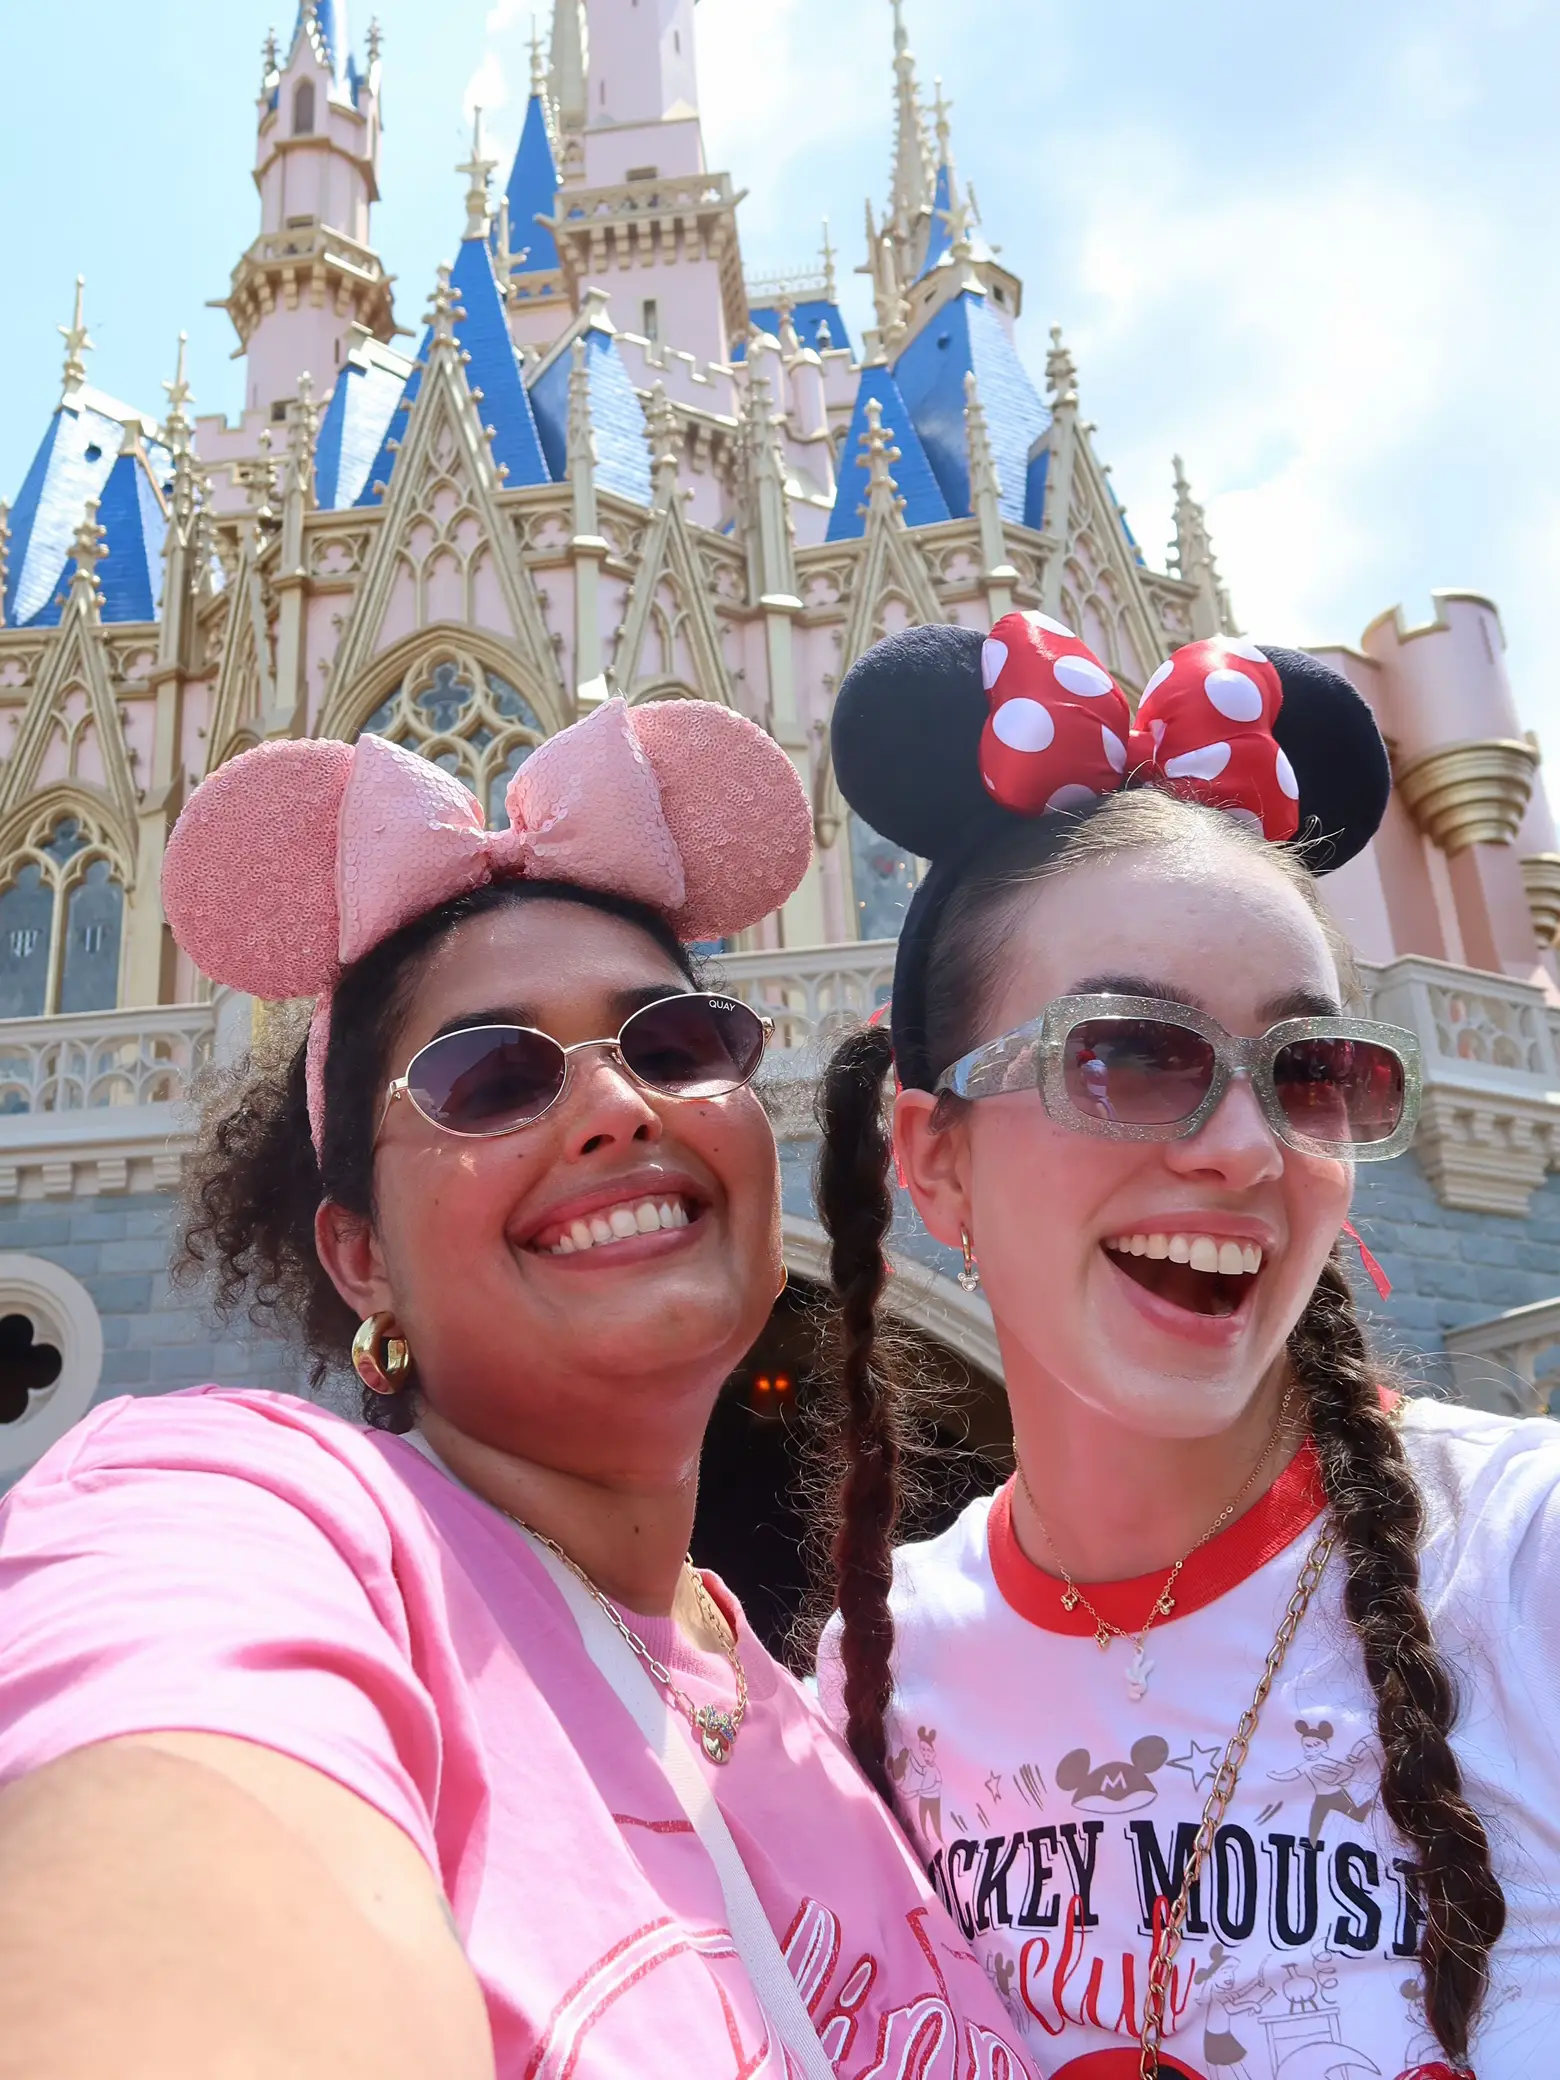  Two women are standing in front of a castle, wearing Mickey Mouse shirts. They are smiling and posing for a picture.